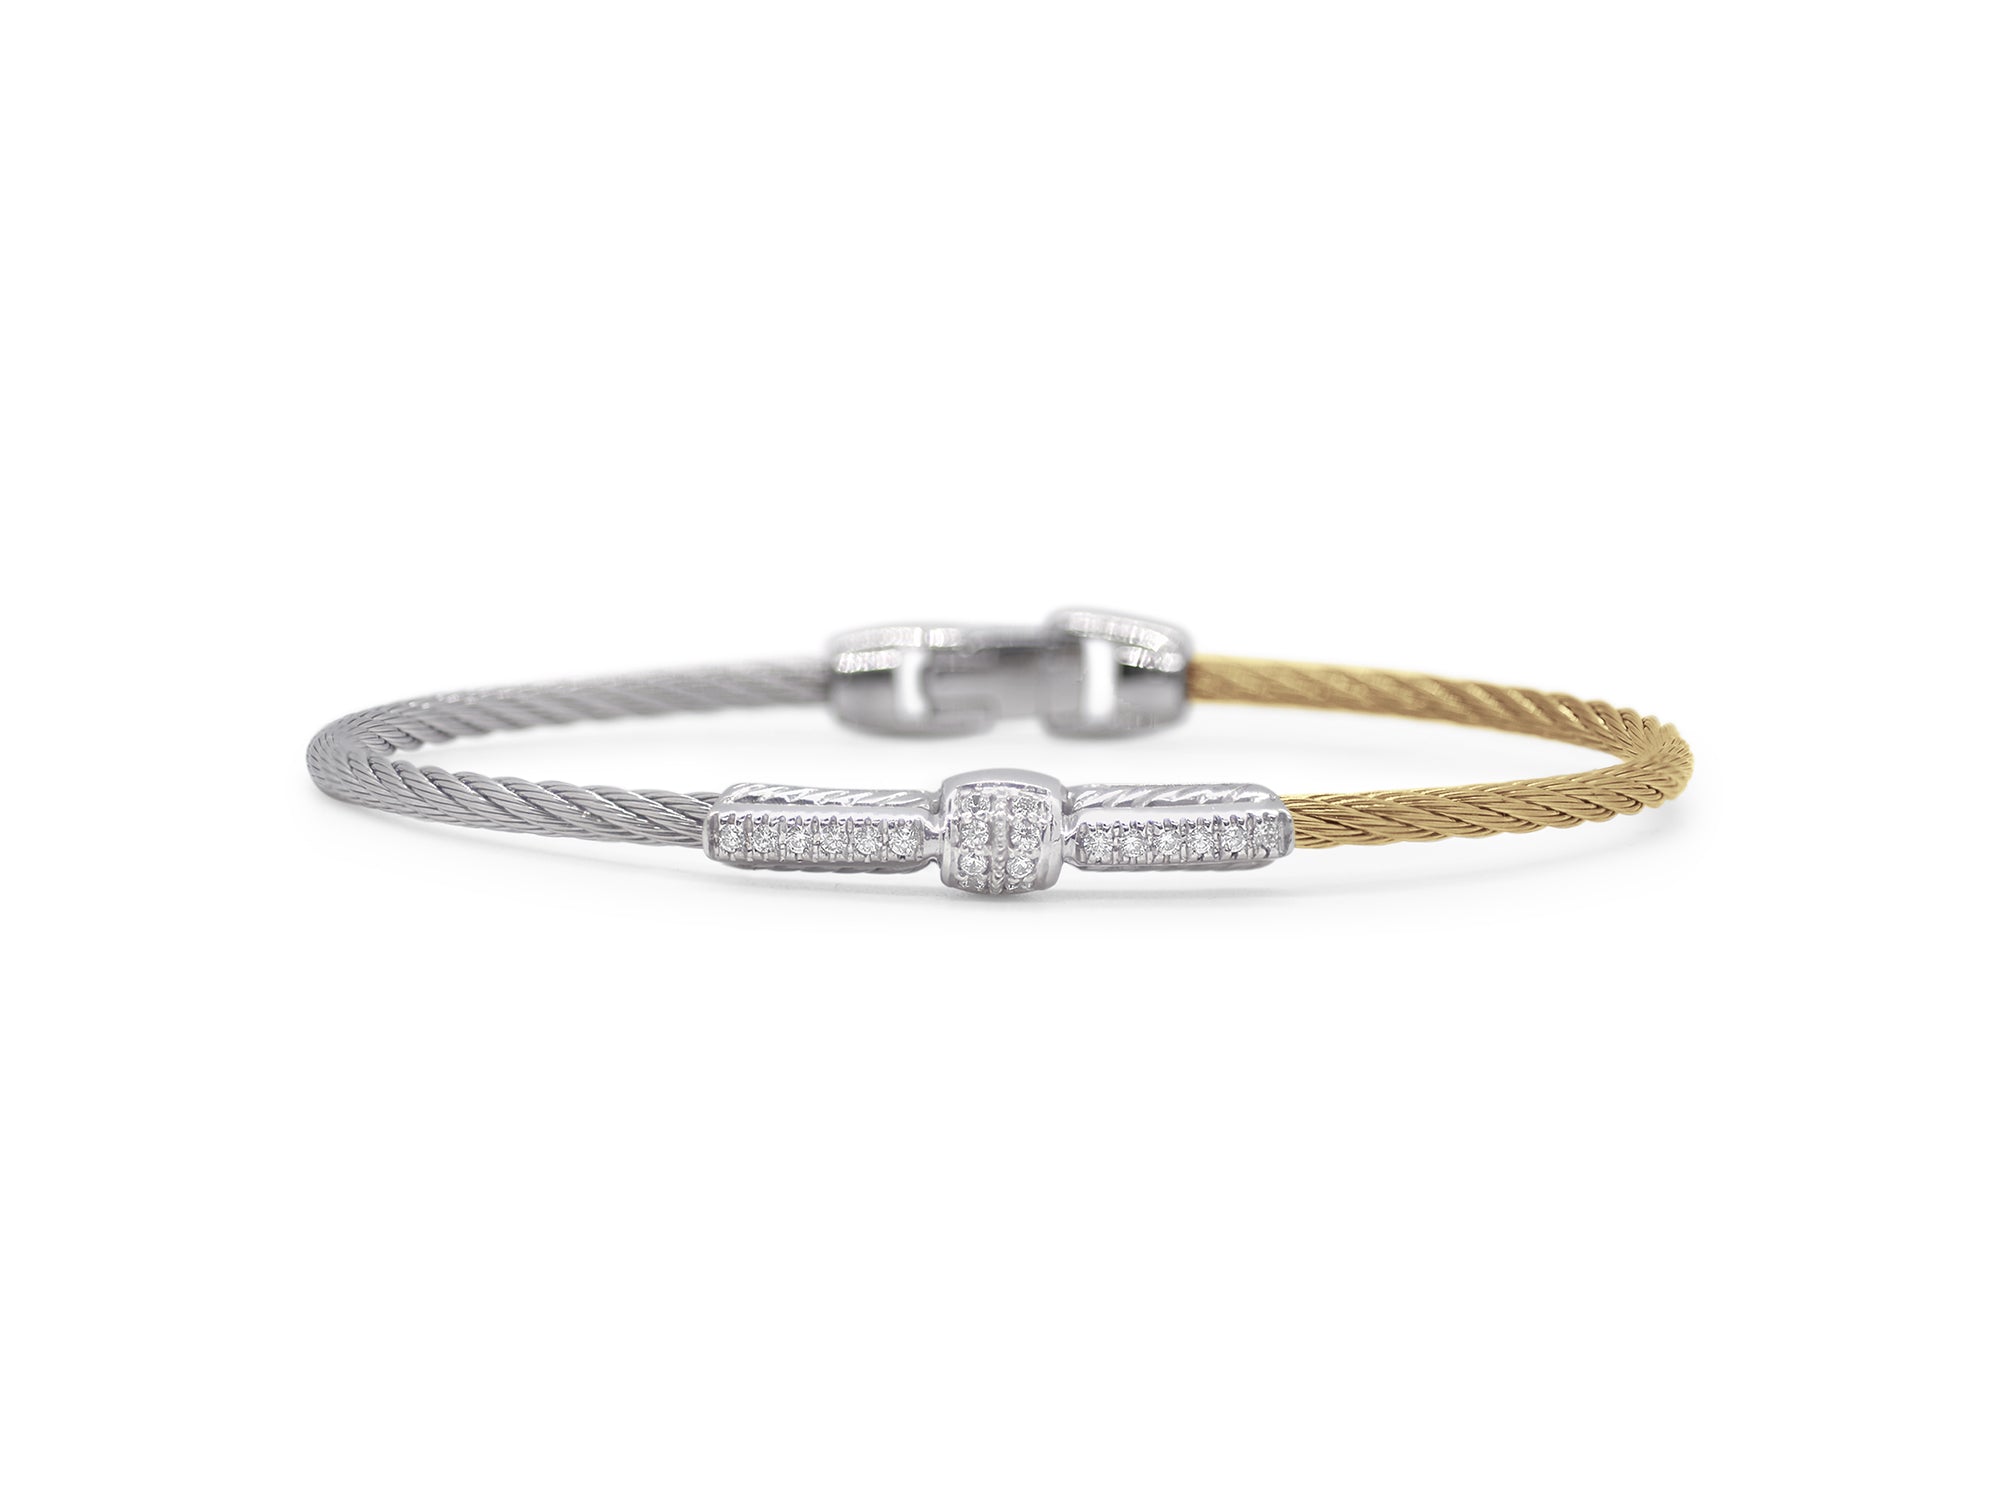 Grey & Yellow Cable Petite Bar & Barrel Bracelet with 18kt White Gold & Diamonds